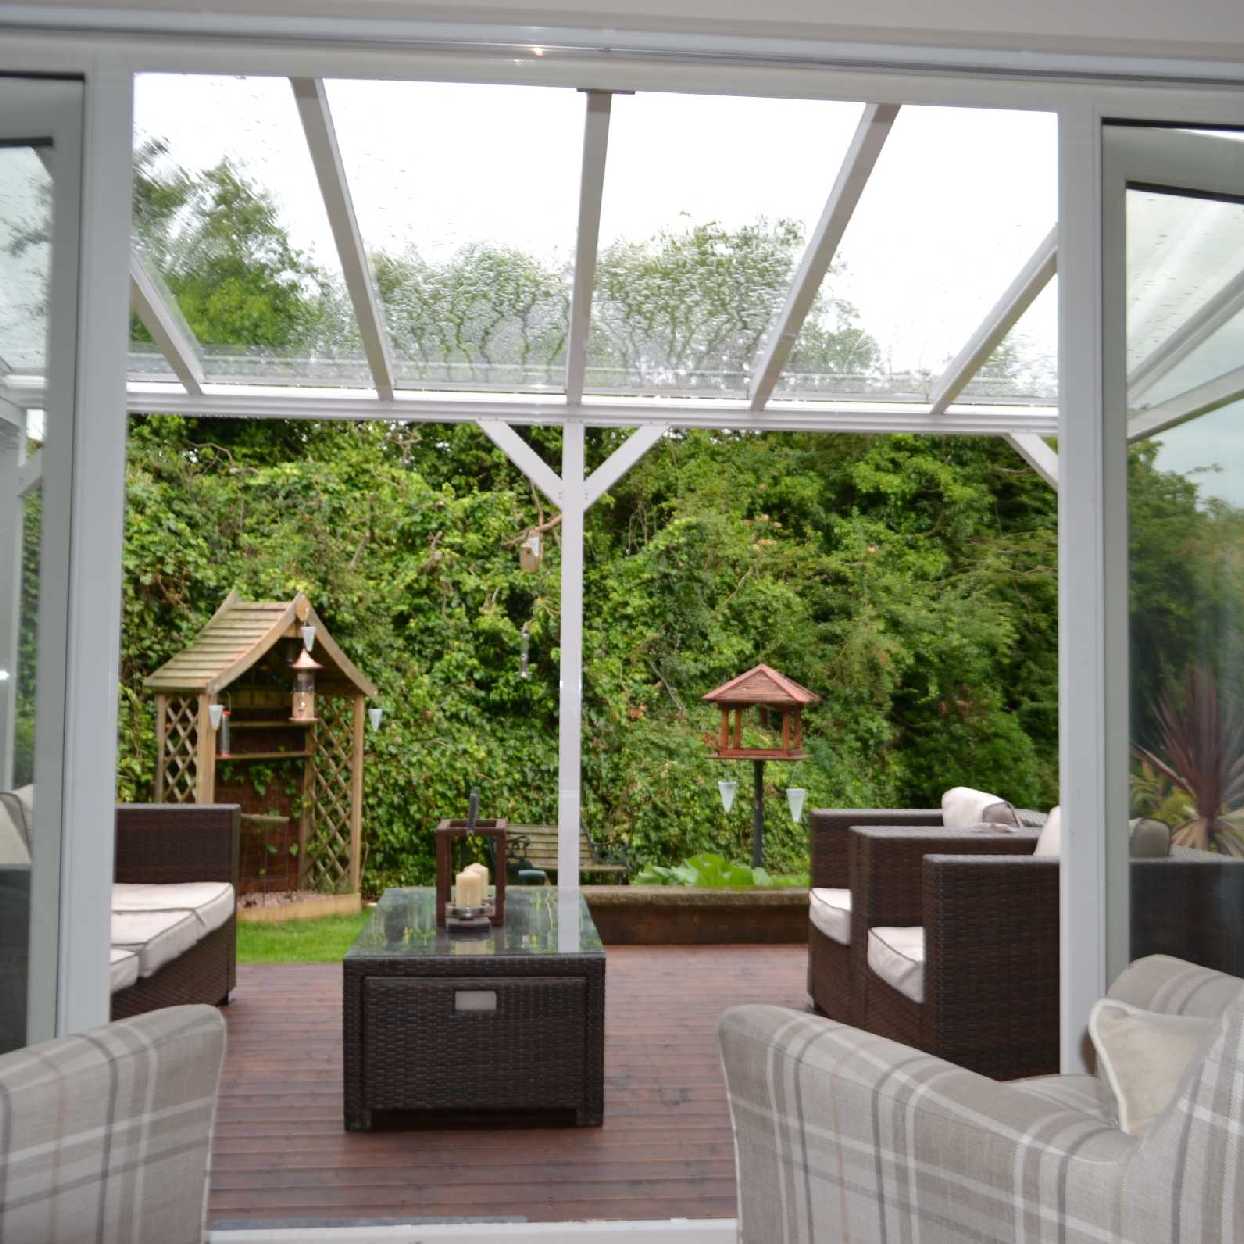 Great selection of Omega Smart Lean-To Canopy, White UNGLAZED for 6mm Glazing - 8.4m (W) x 2.5m (P), (4) Supporting Posts